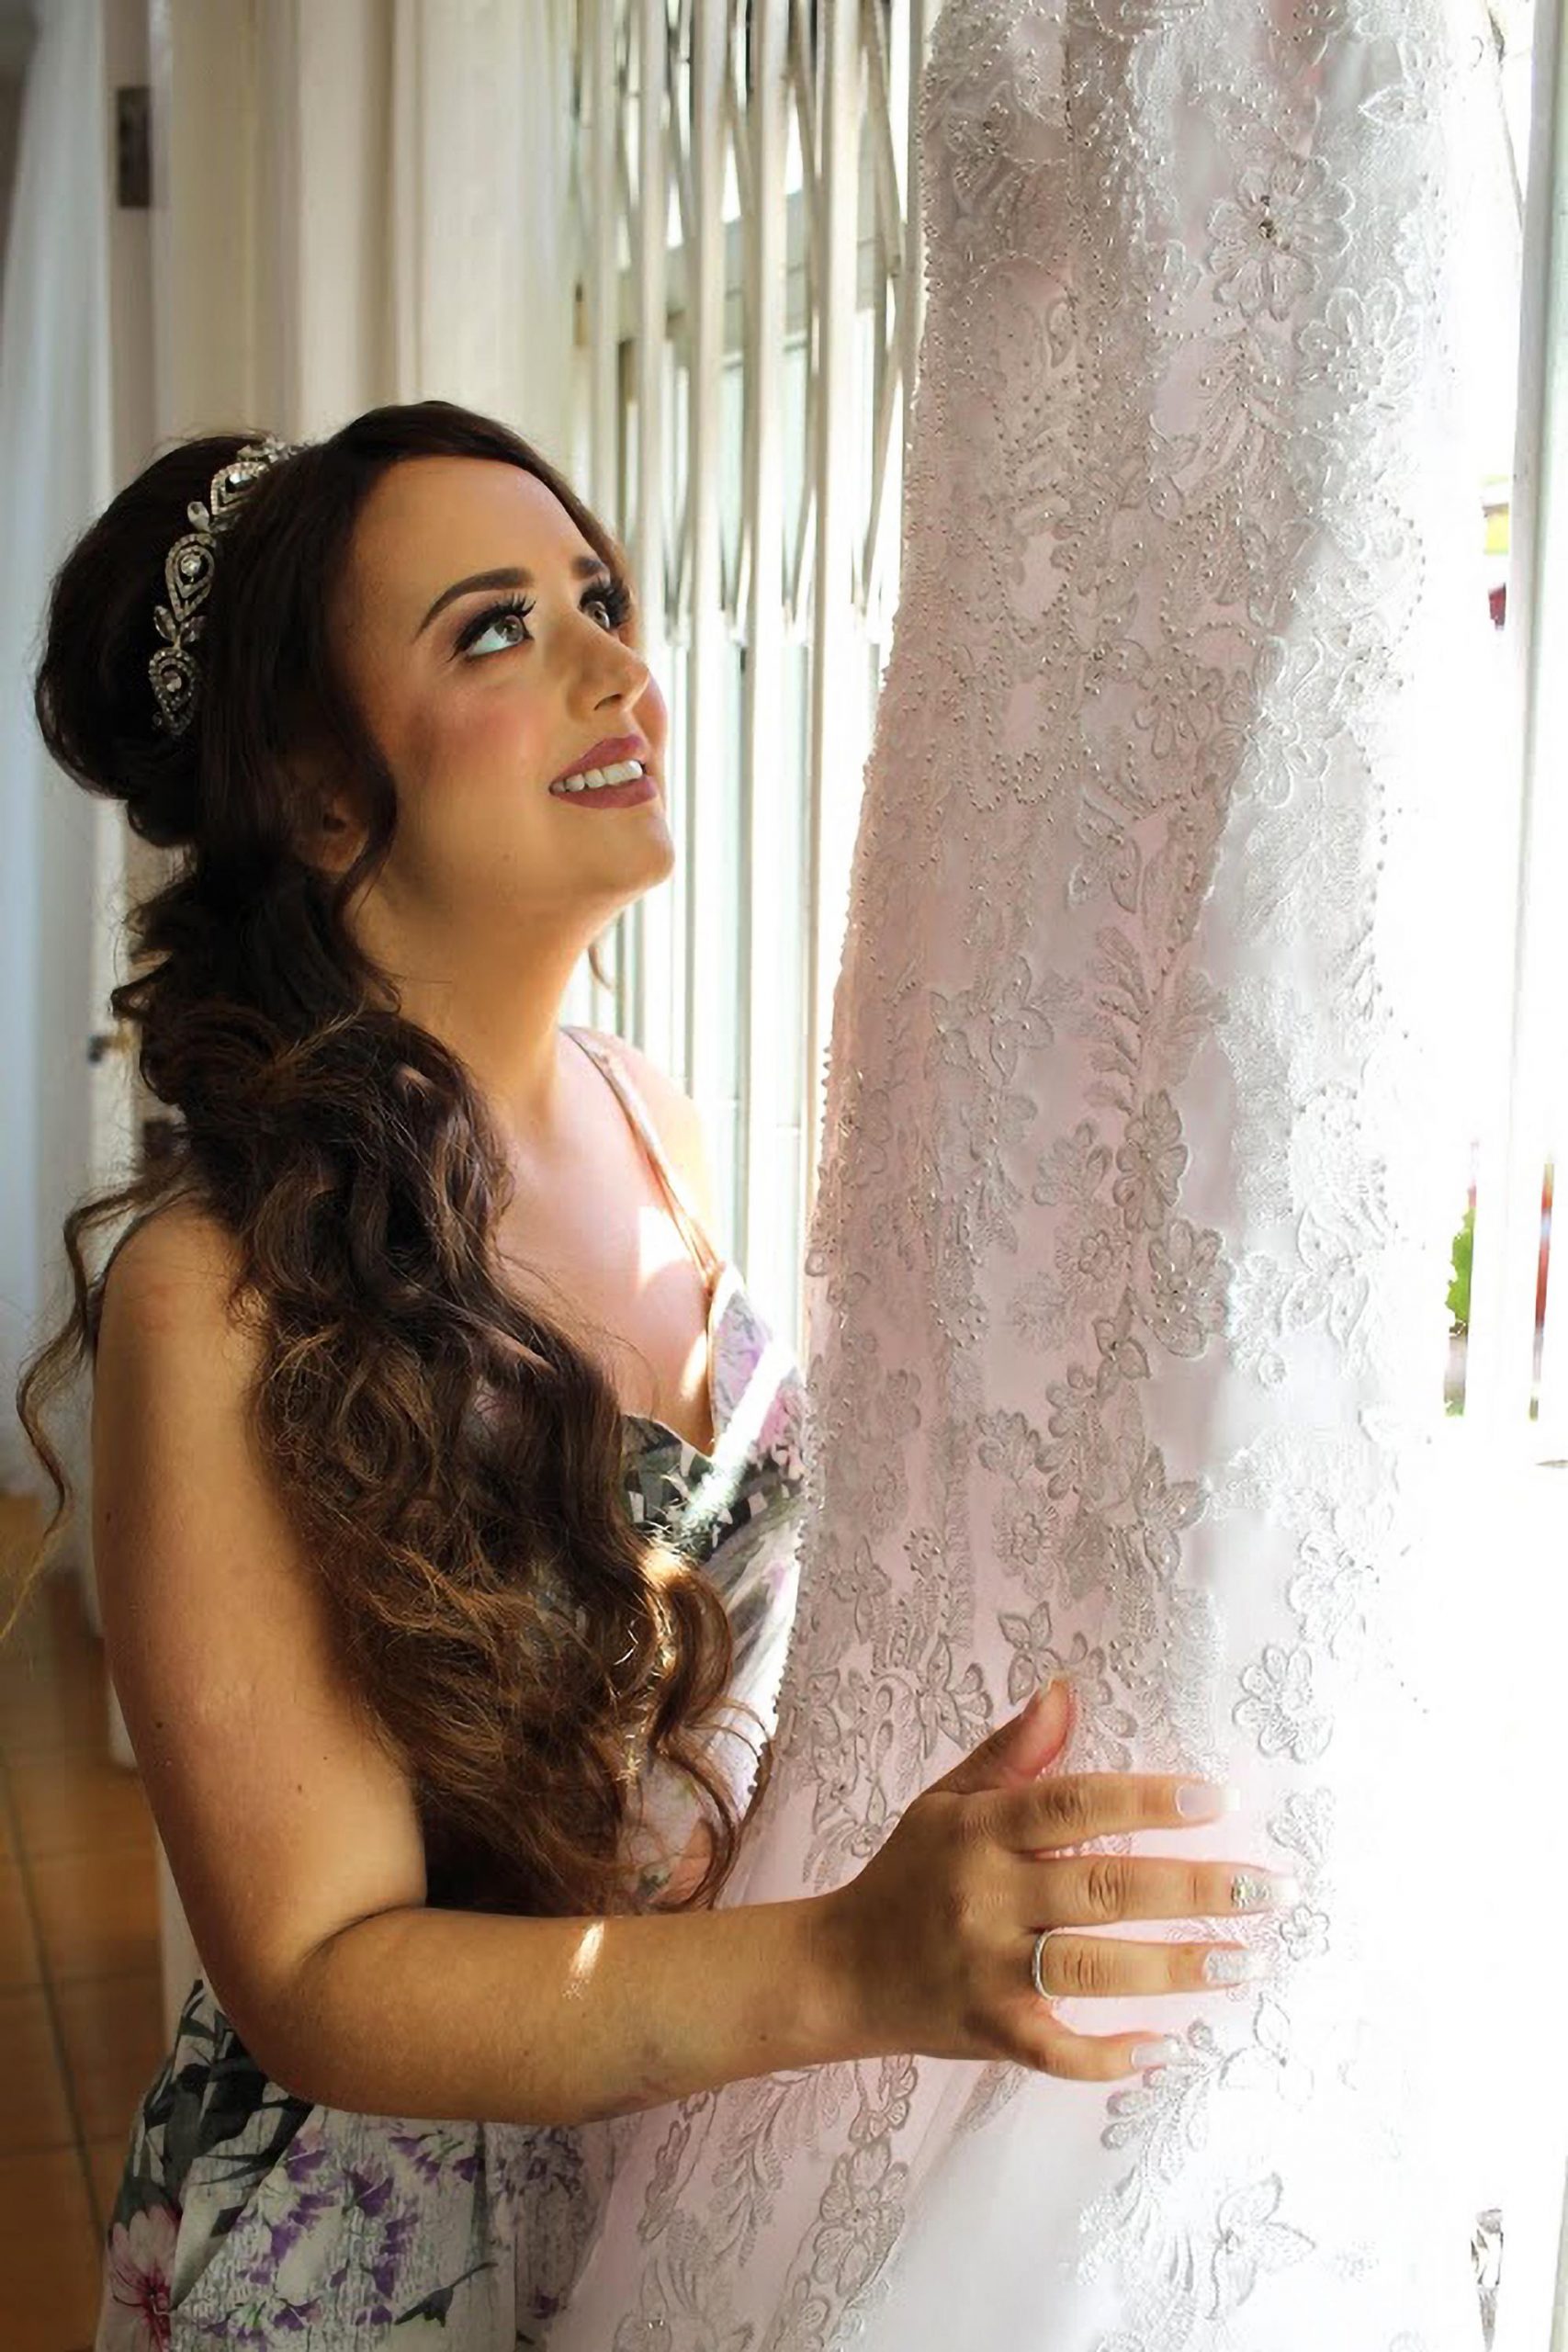 Read more about the article Bride Has Dream Wedding 10 Days Before Succumbing To Rare Cancer